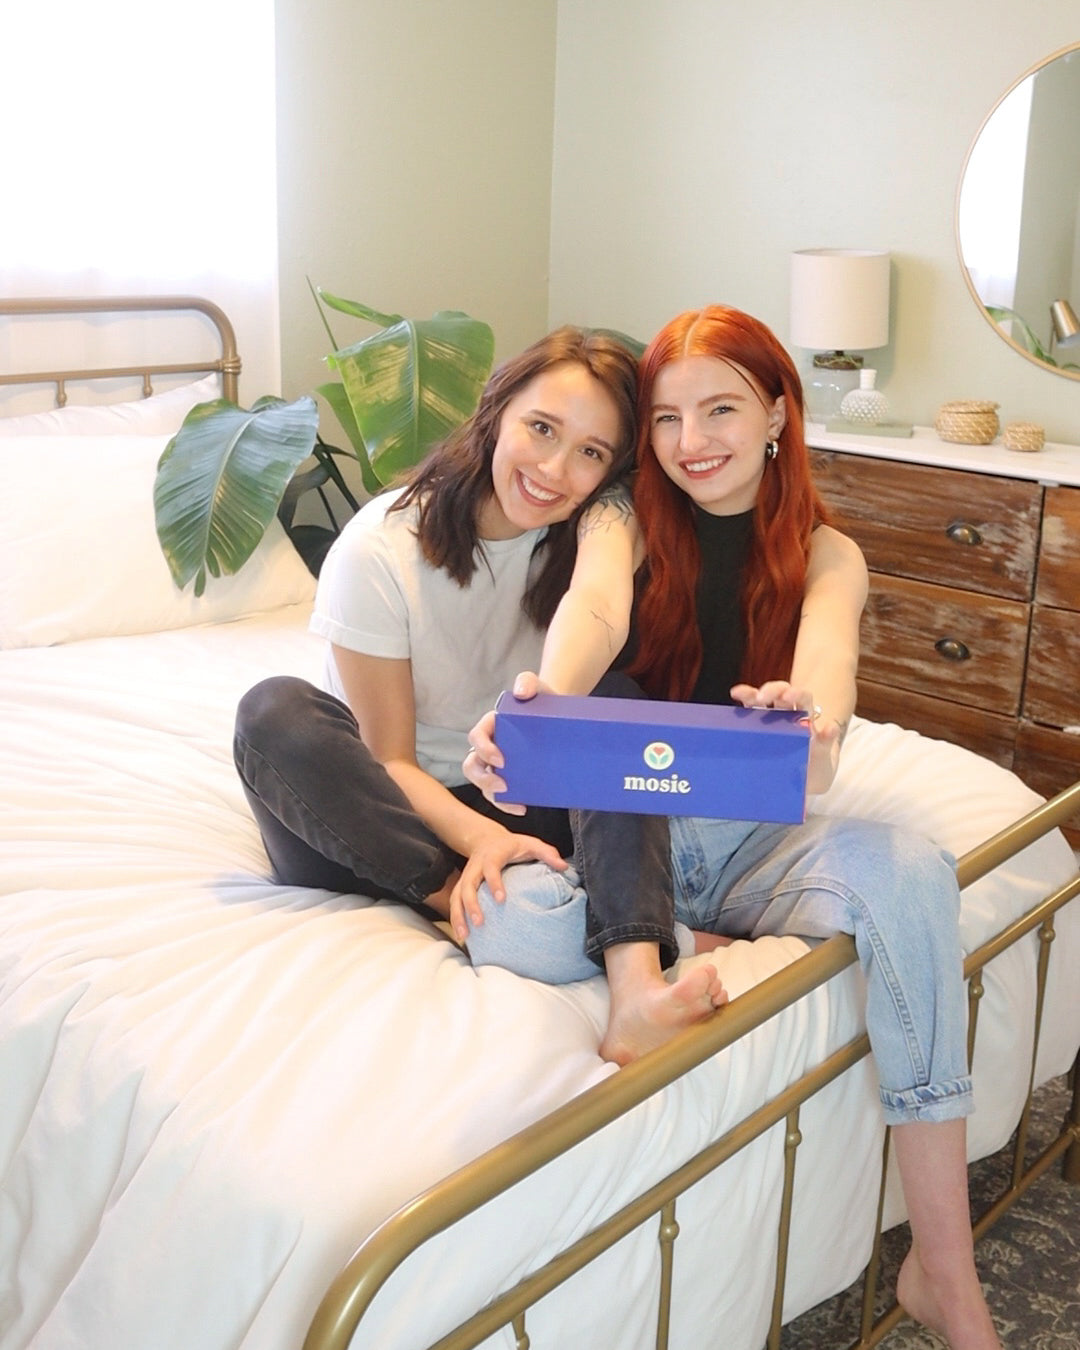 Abbie and Julia Ensign sitting on their bed holding the Mosie Kit